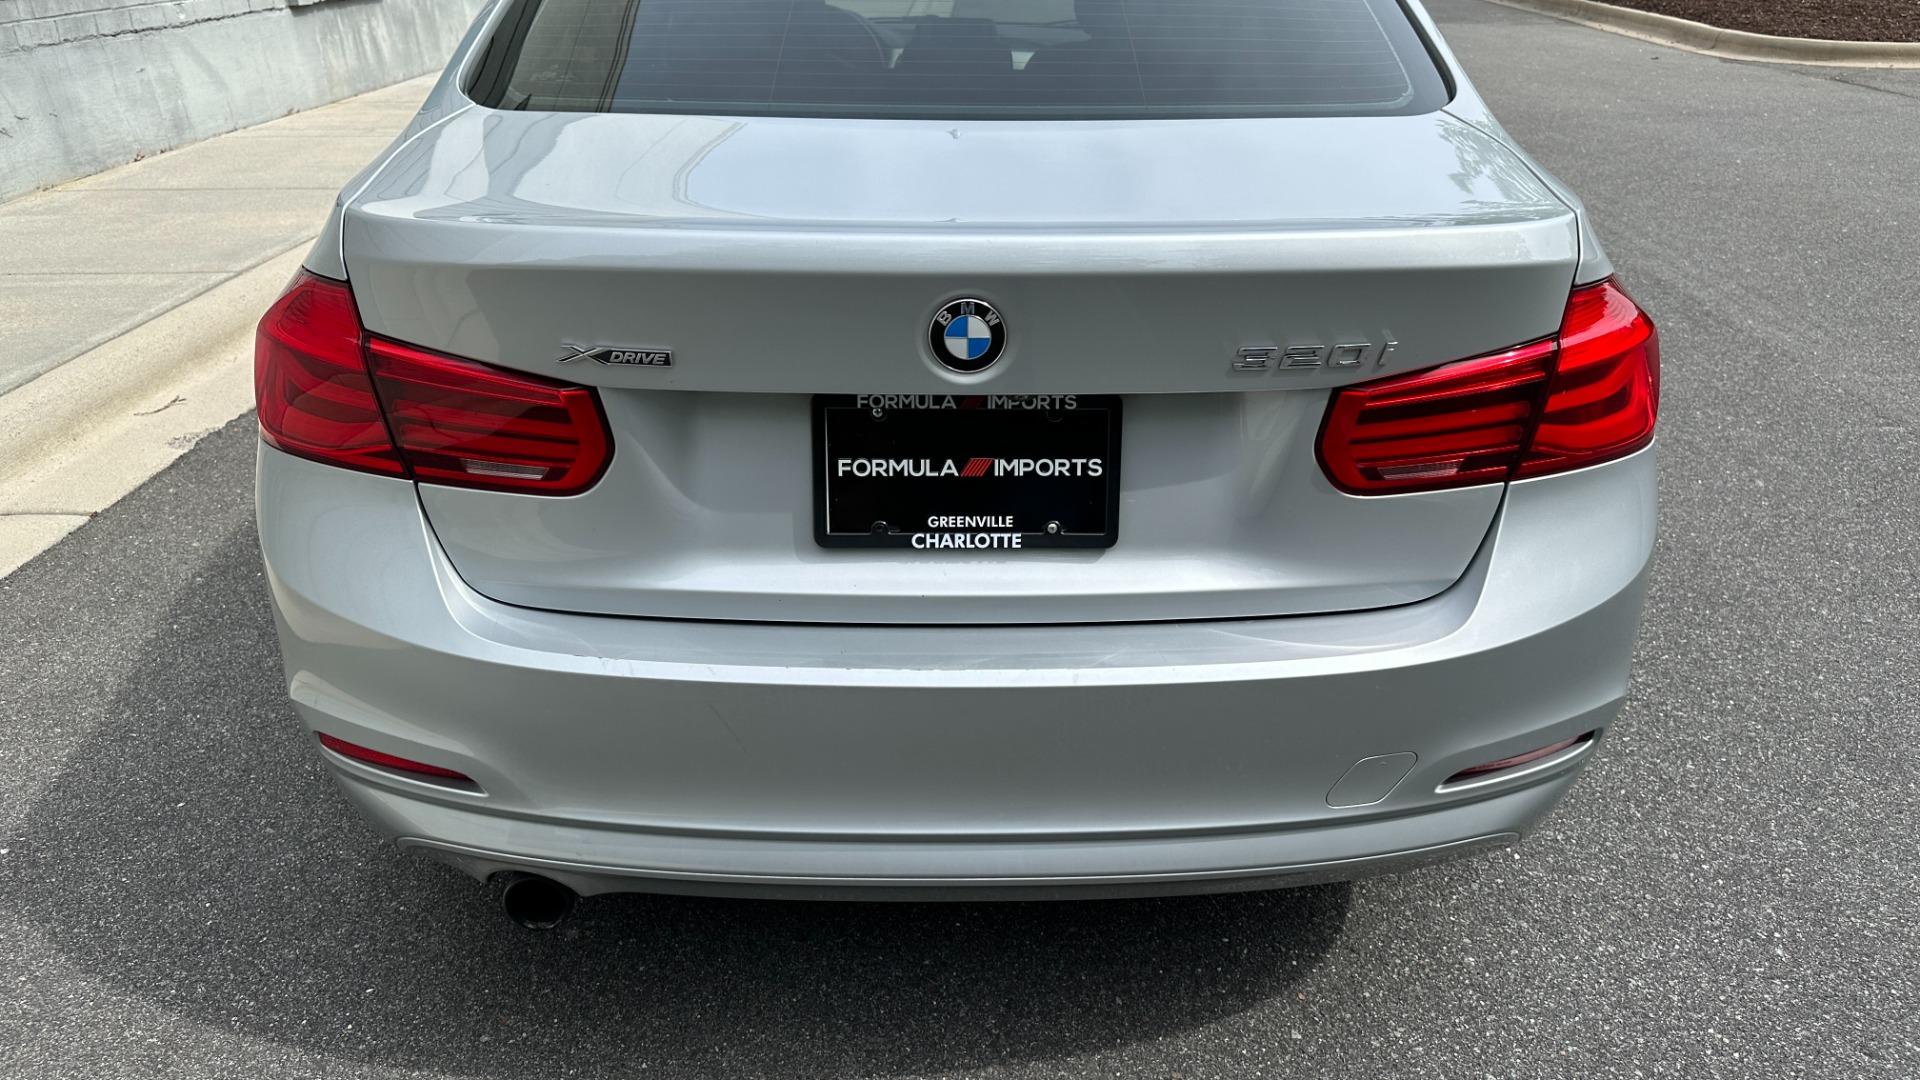 Used 2018 BMW 3 SERIES 320I XDRIVE SEDAN / HTD STS / ACTV BLIND SPT DET / REARVIEW for sale $27,995 at Formula Imports in Charlotte NC 28227 7